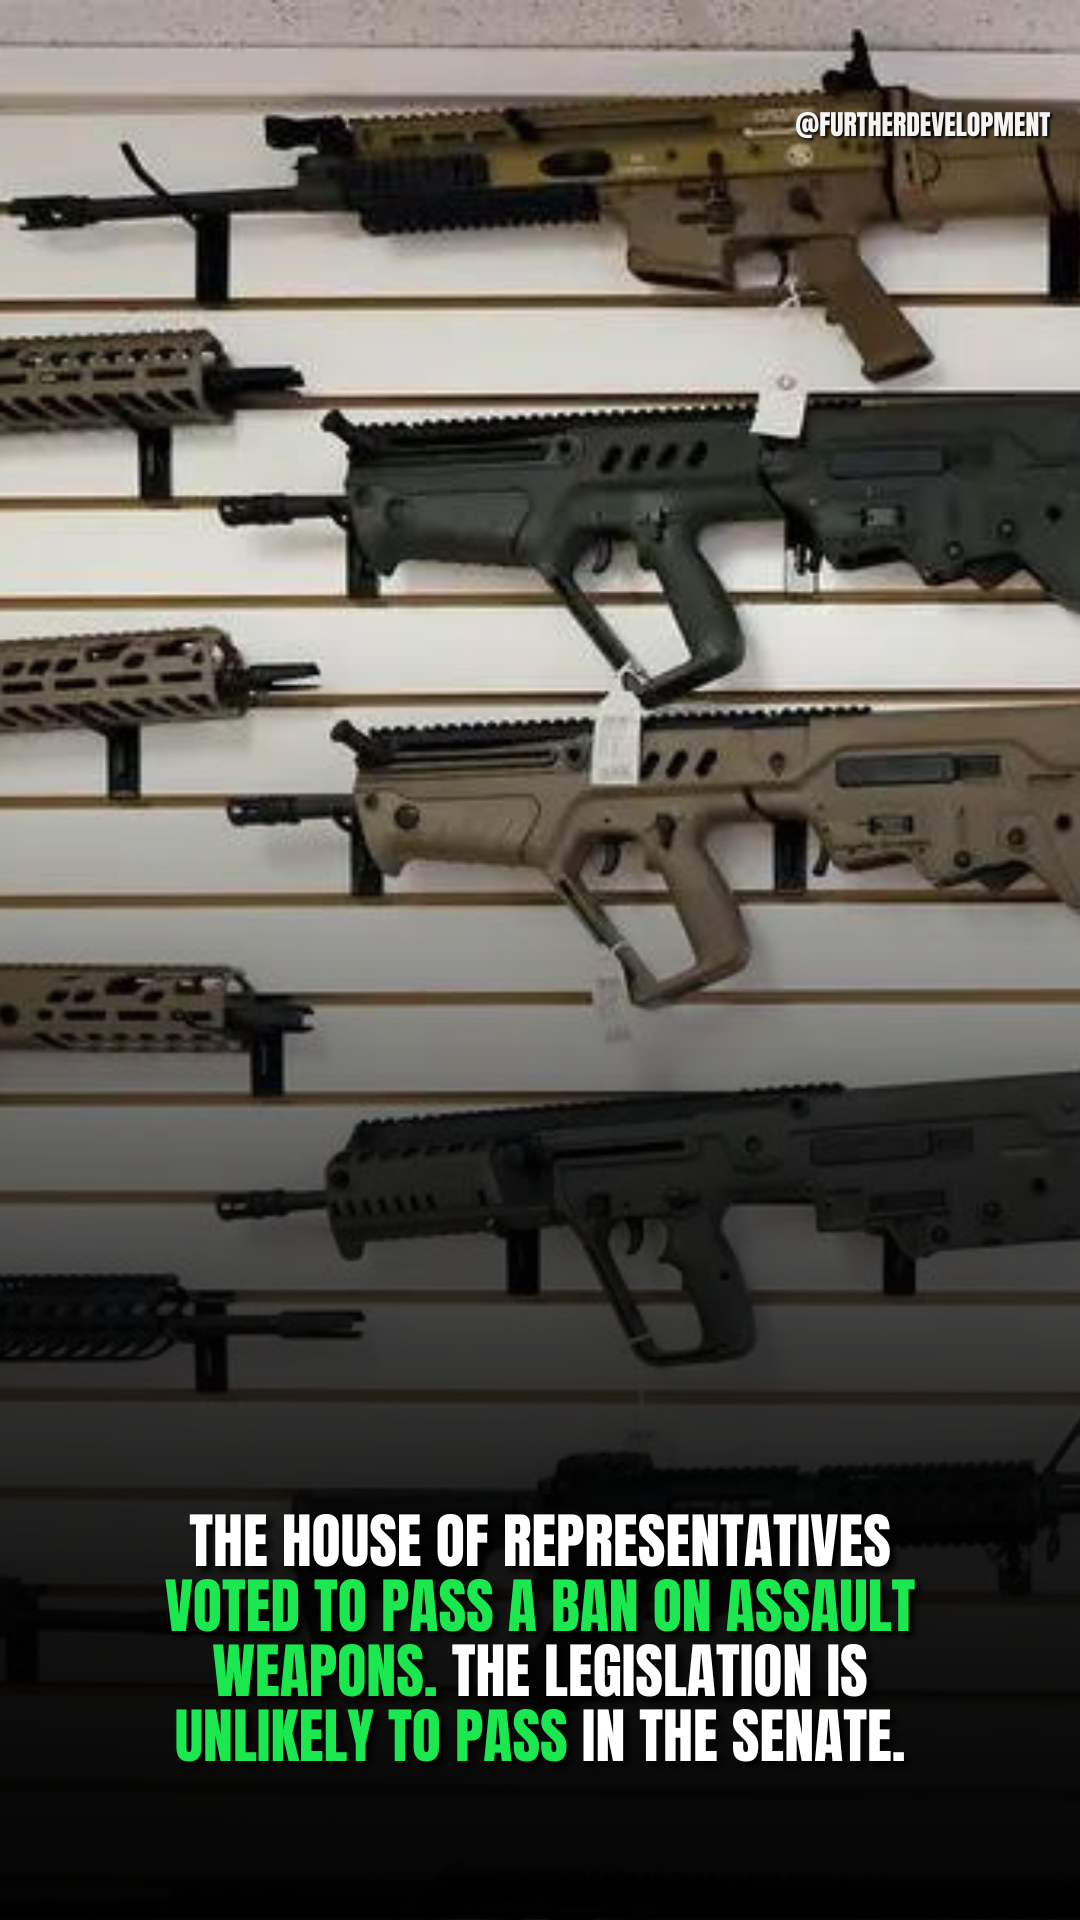 HOUSE VOTES TO BAN SEMI-AUTOMATIC WEAPONS